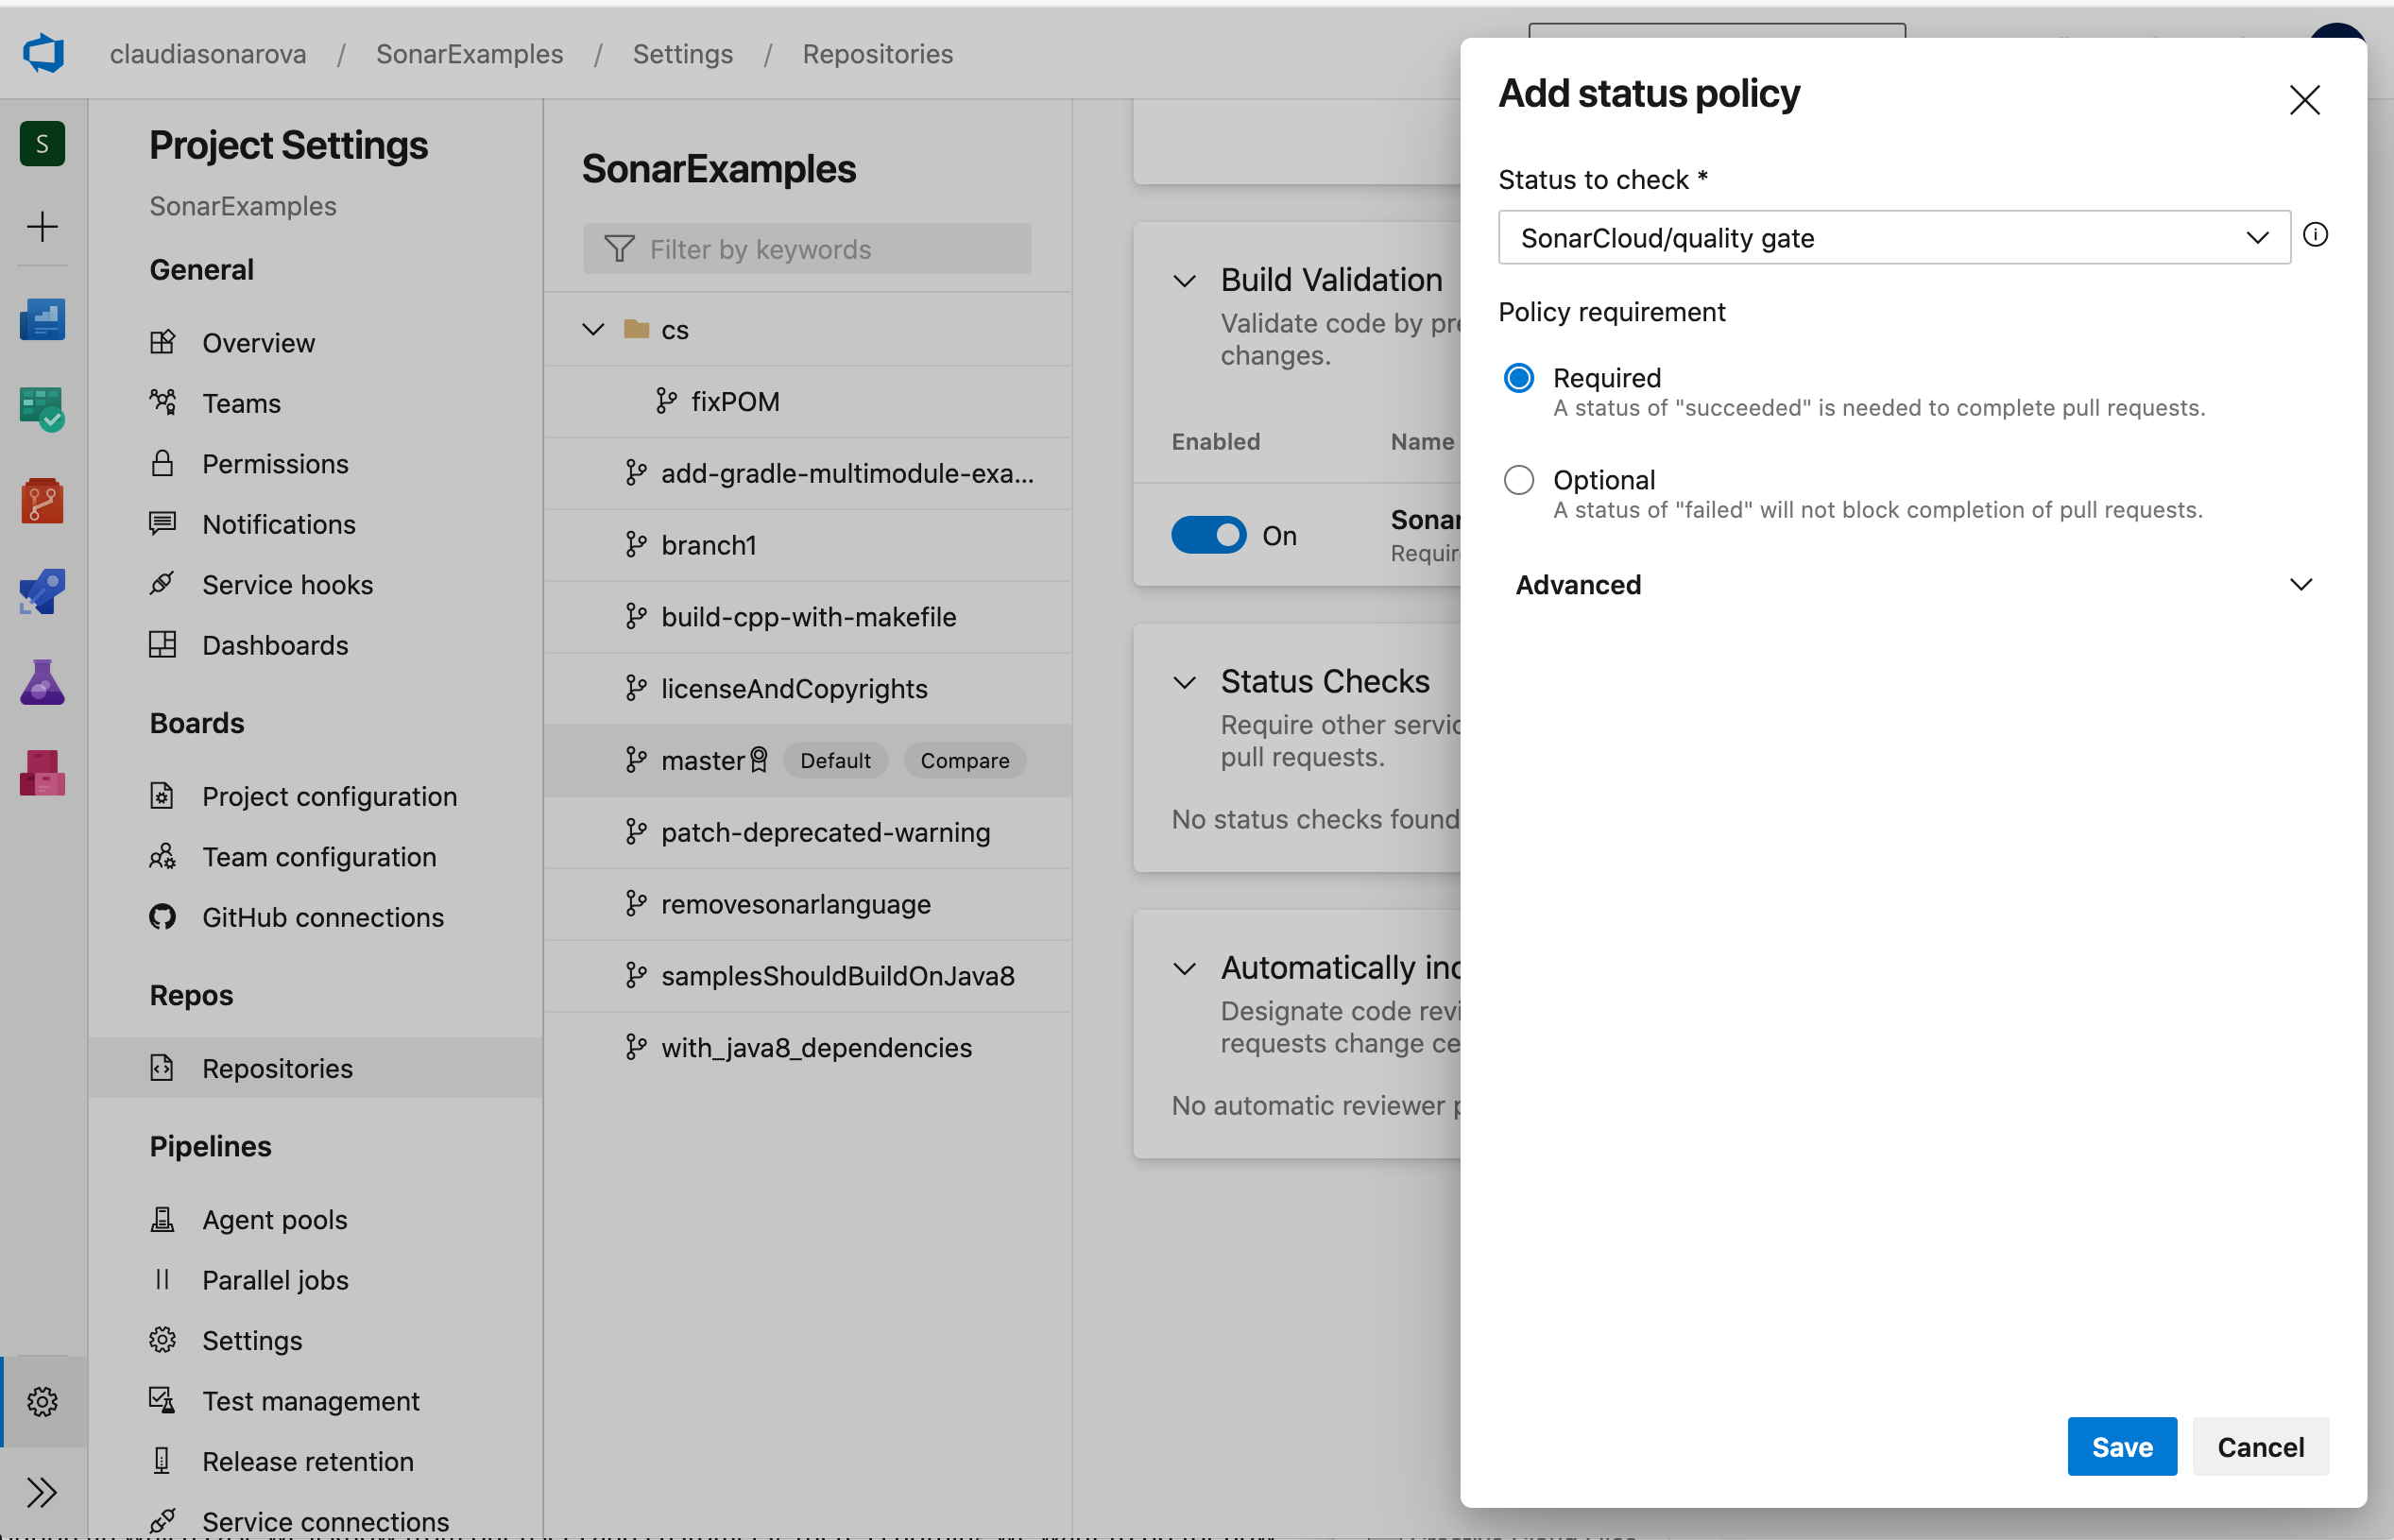 vsts_status_policy_add